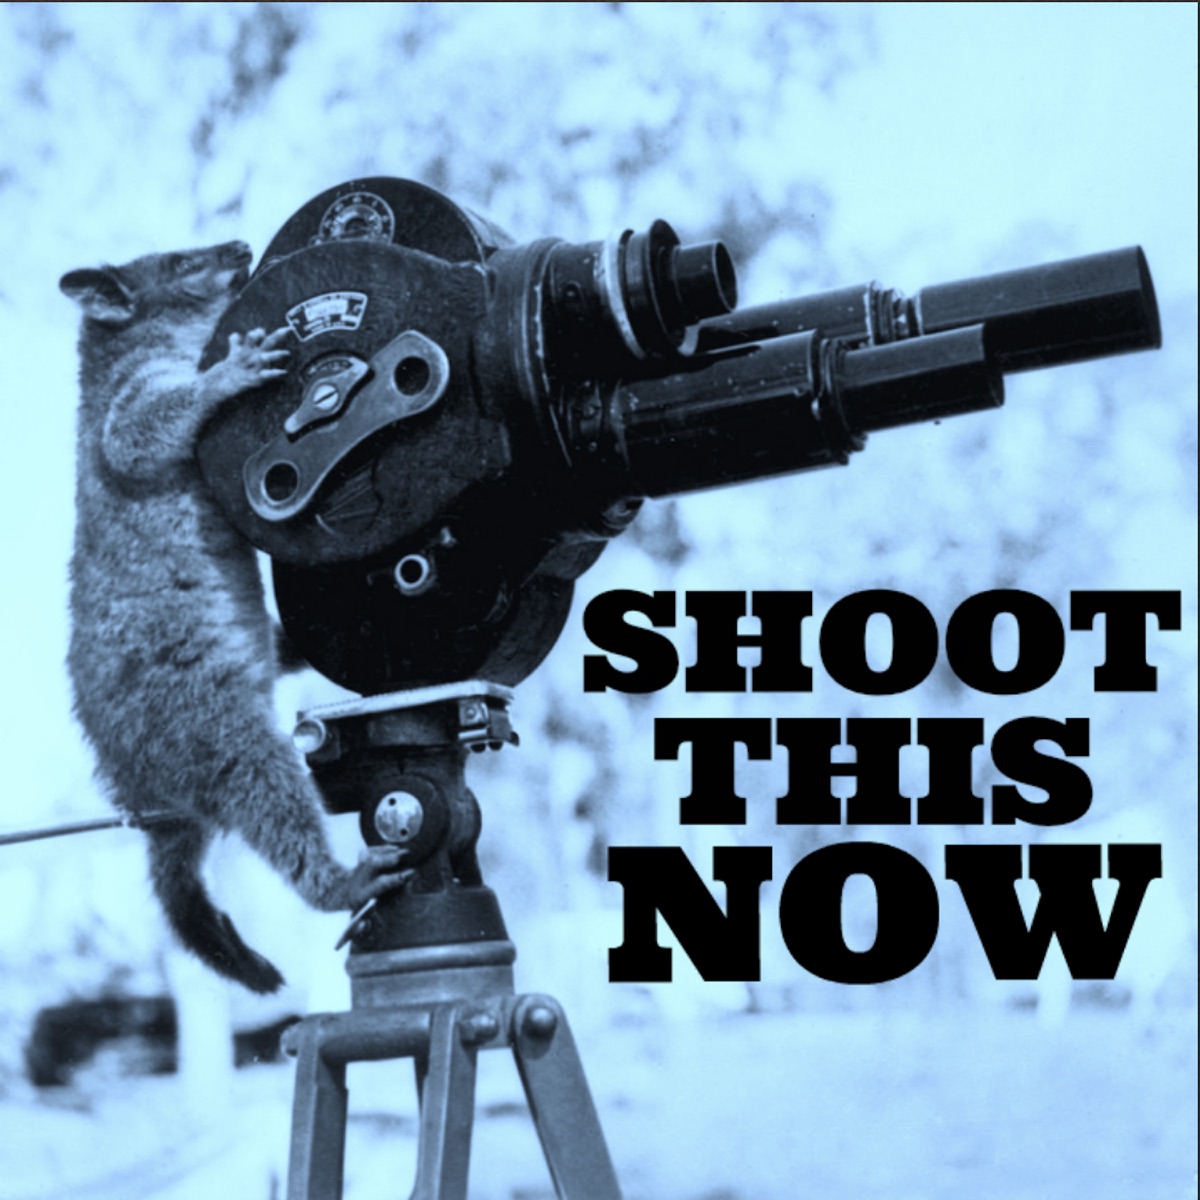 Nudist Day - The Barry Rothbart Nudist Videographer Story â€“ Shoot This Now â€“ Podcast â€“  Podtail